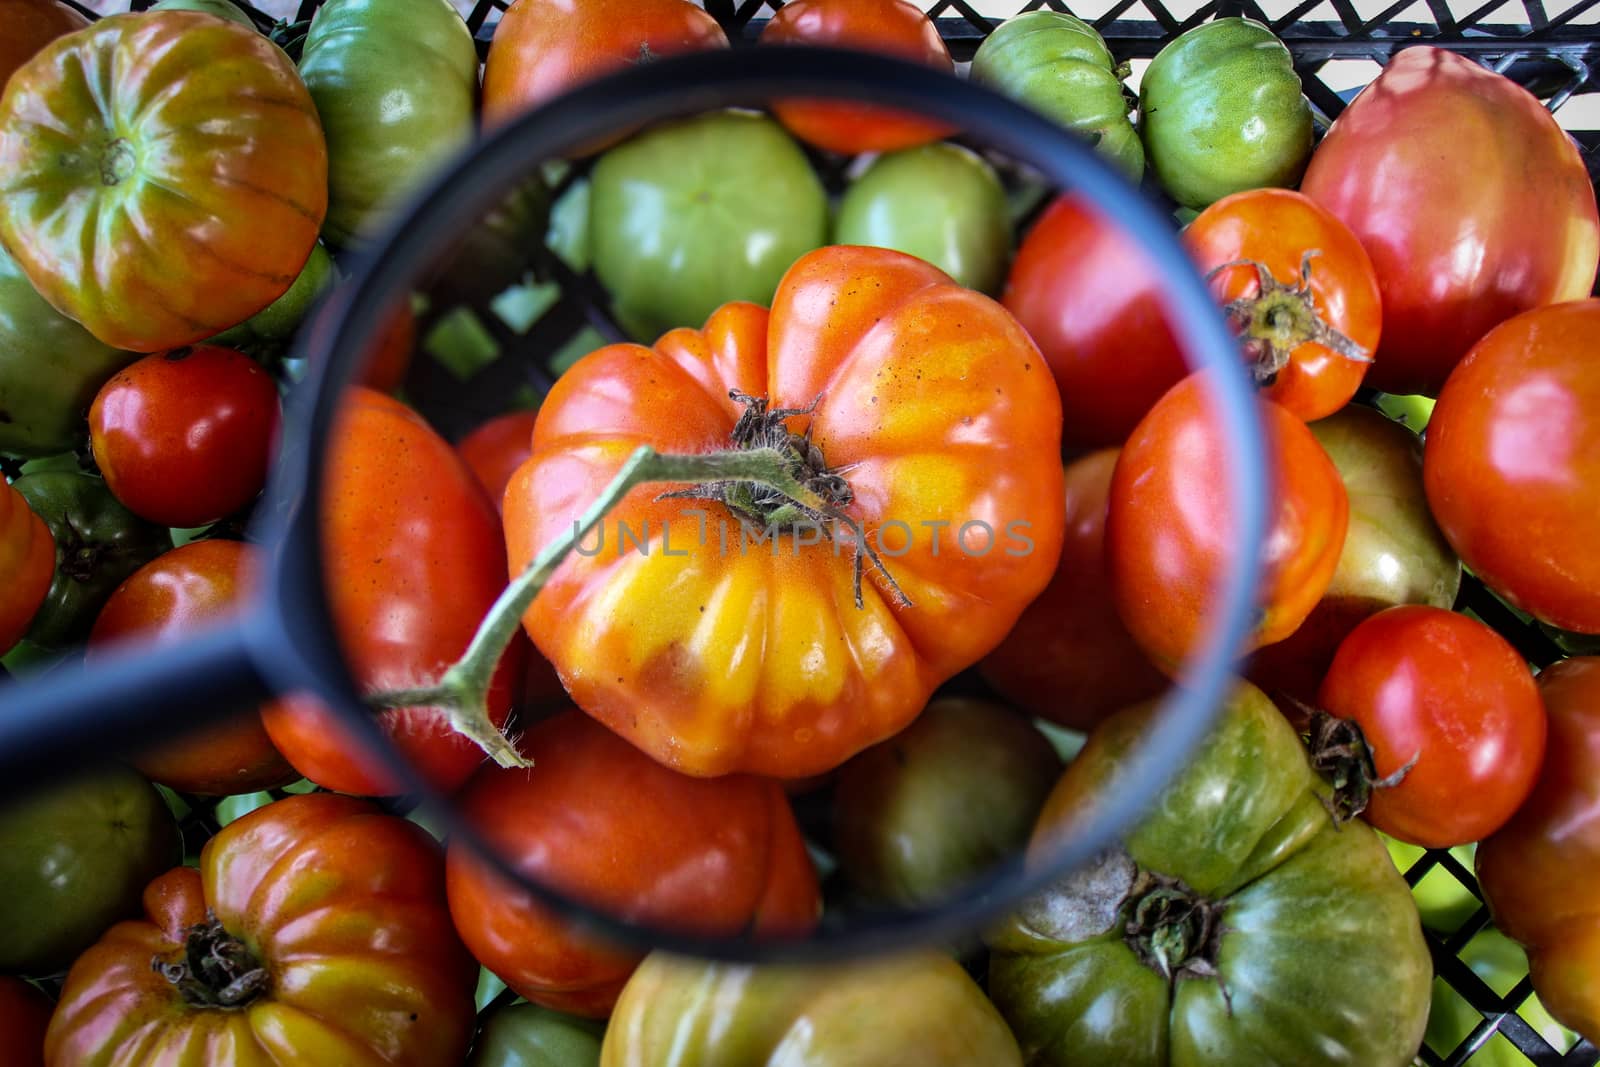 A large red tomato magnified with a magnifying glass in a crate full of tomatoes. A large ripe tomato among other tomatoes. Zavidovici, Bosnia and Herzegovina.